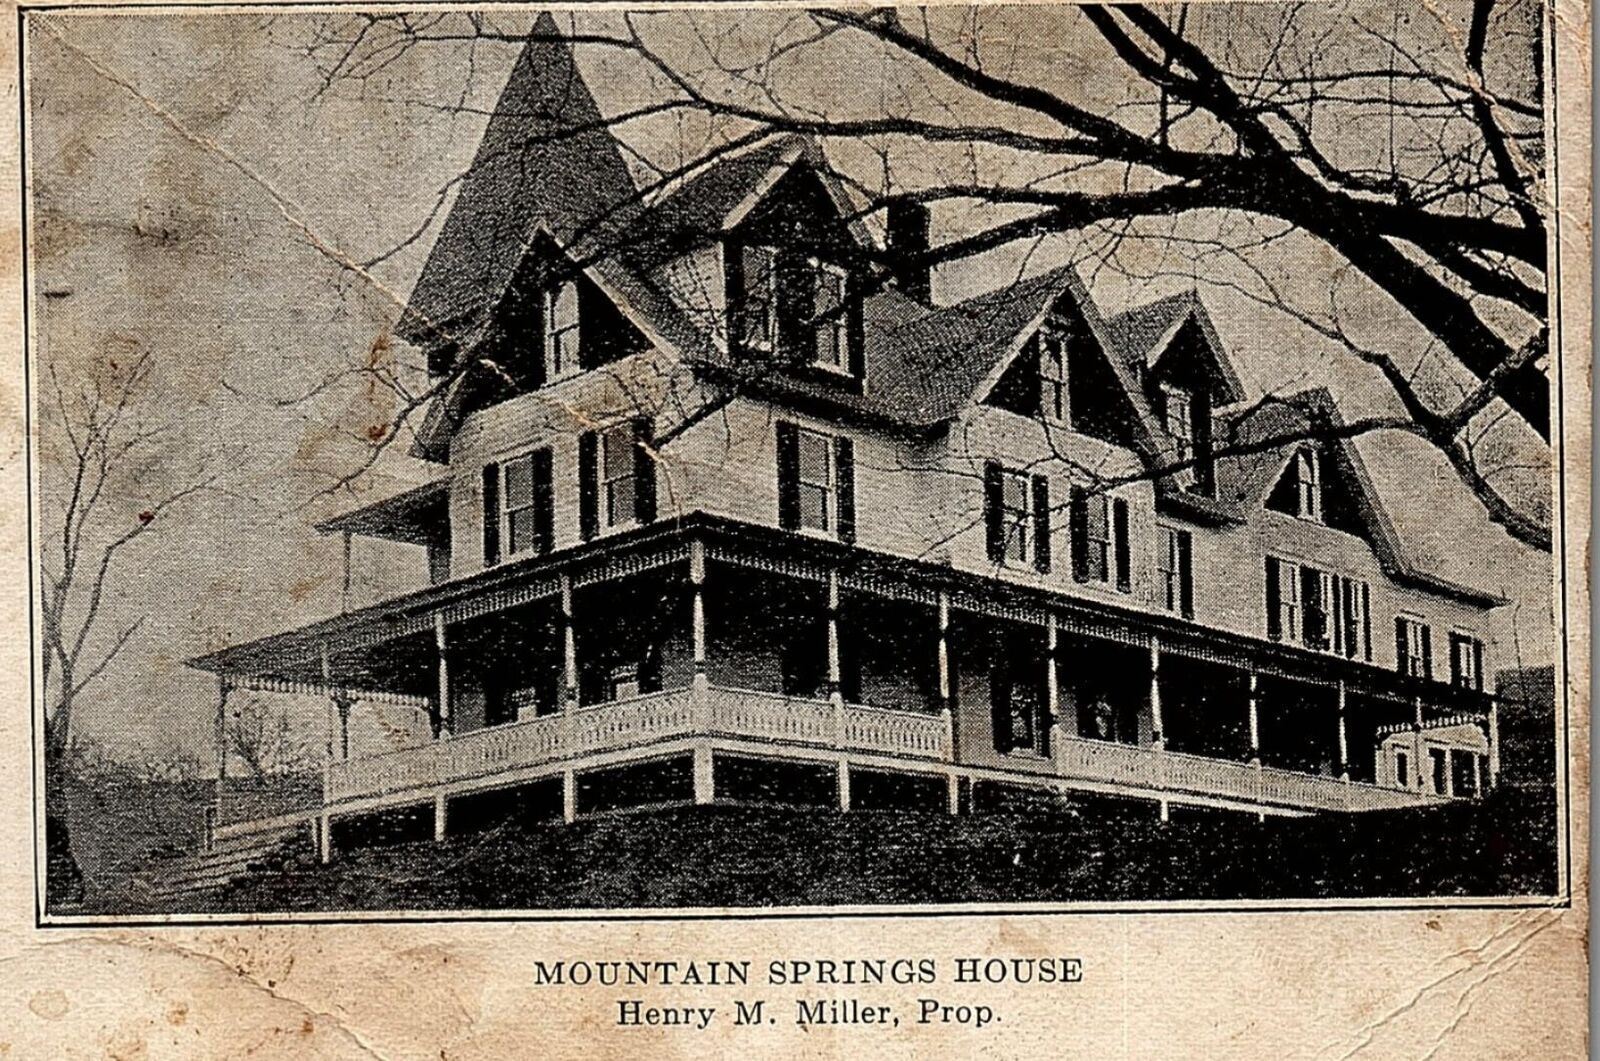 1912 SULLIVAN CO NY MOUNTAIN SPRINGS HOUSE HENRY M. MILLER PROP. POSTCARD 38-82